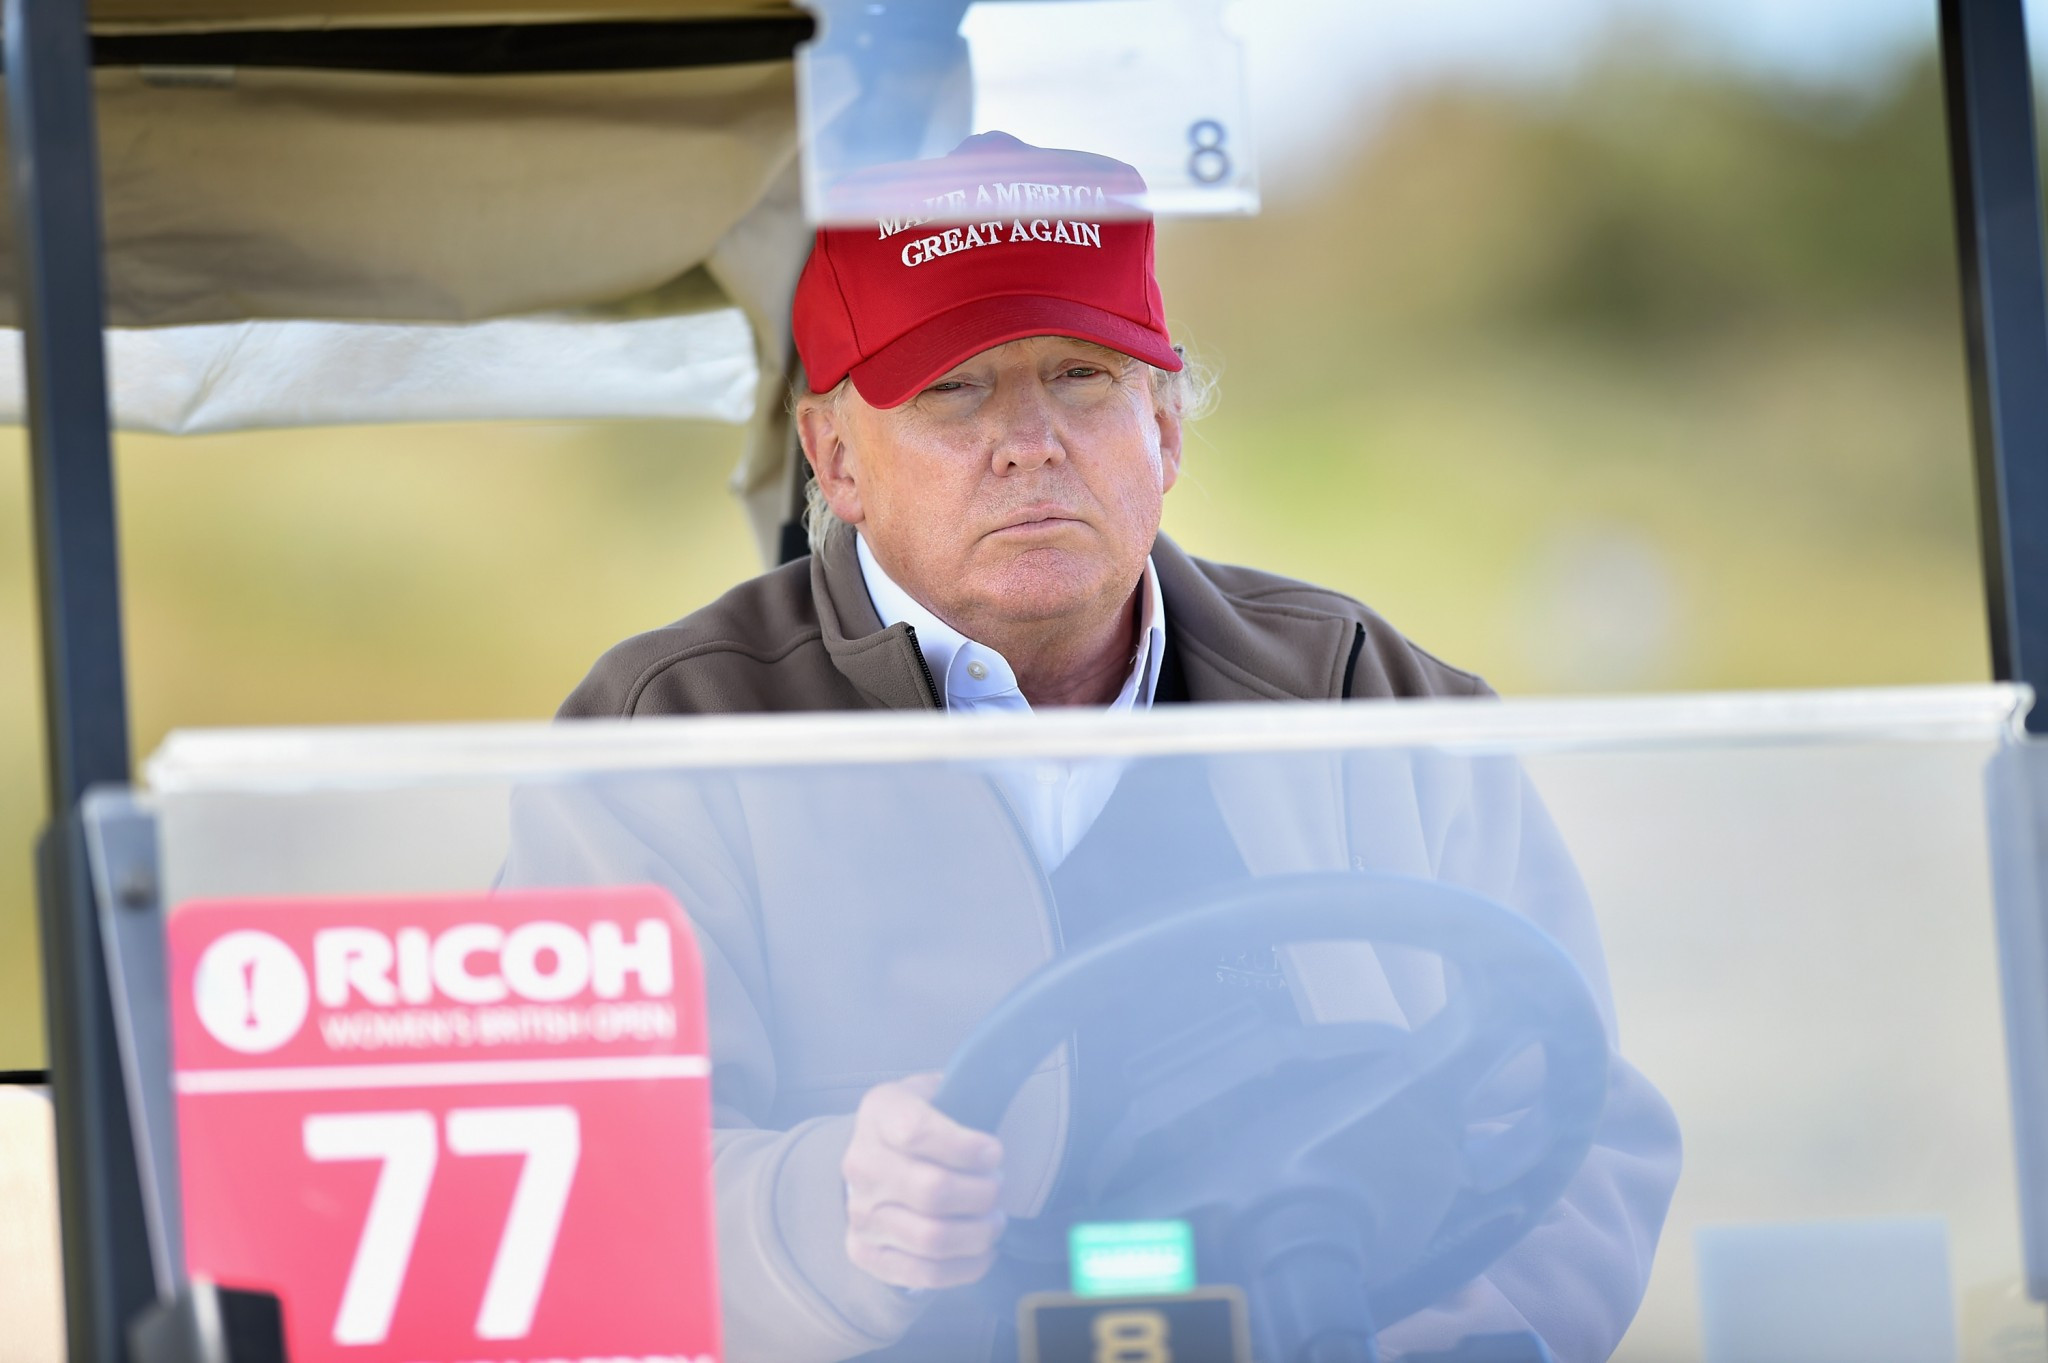 Donald Trump named honorary chairman of 2017 Presidents Cup